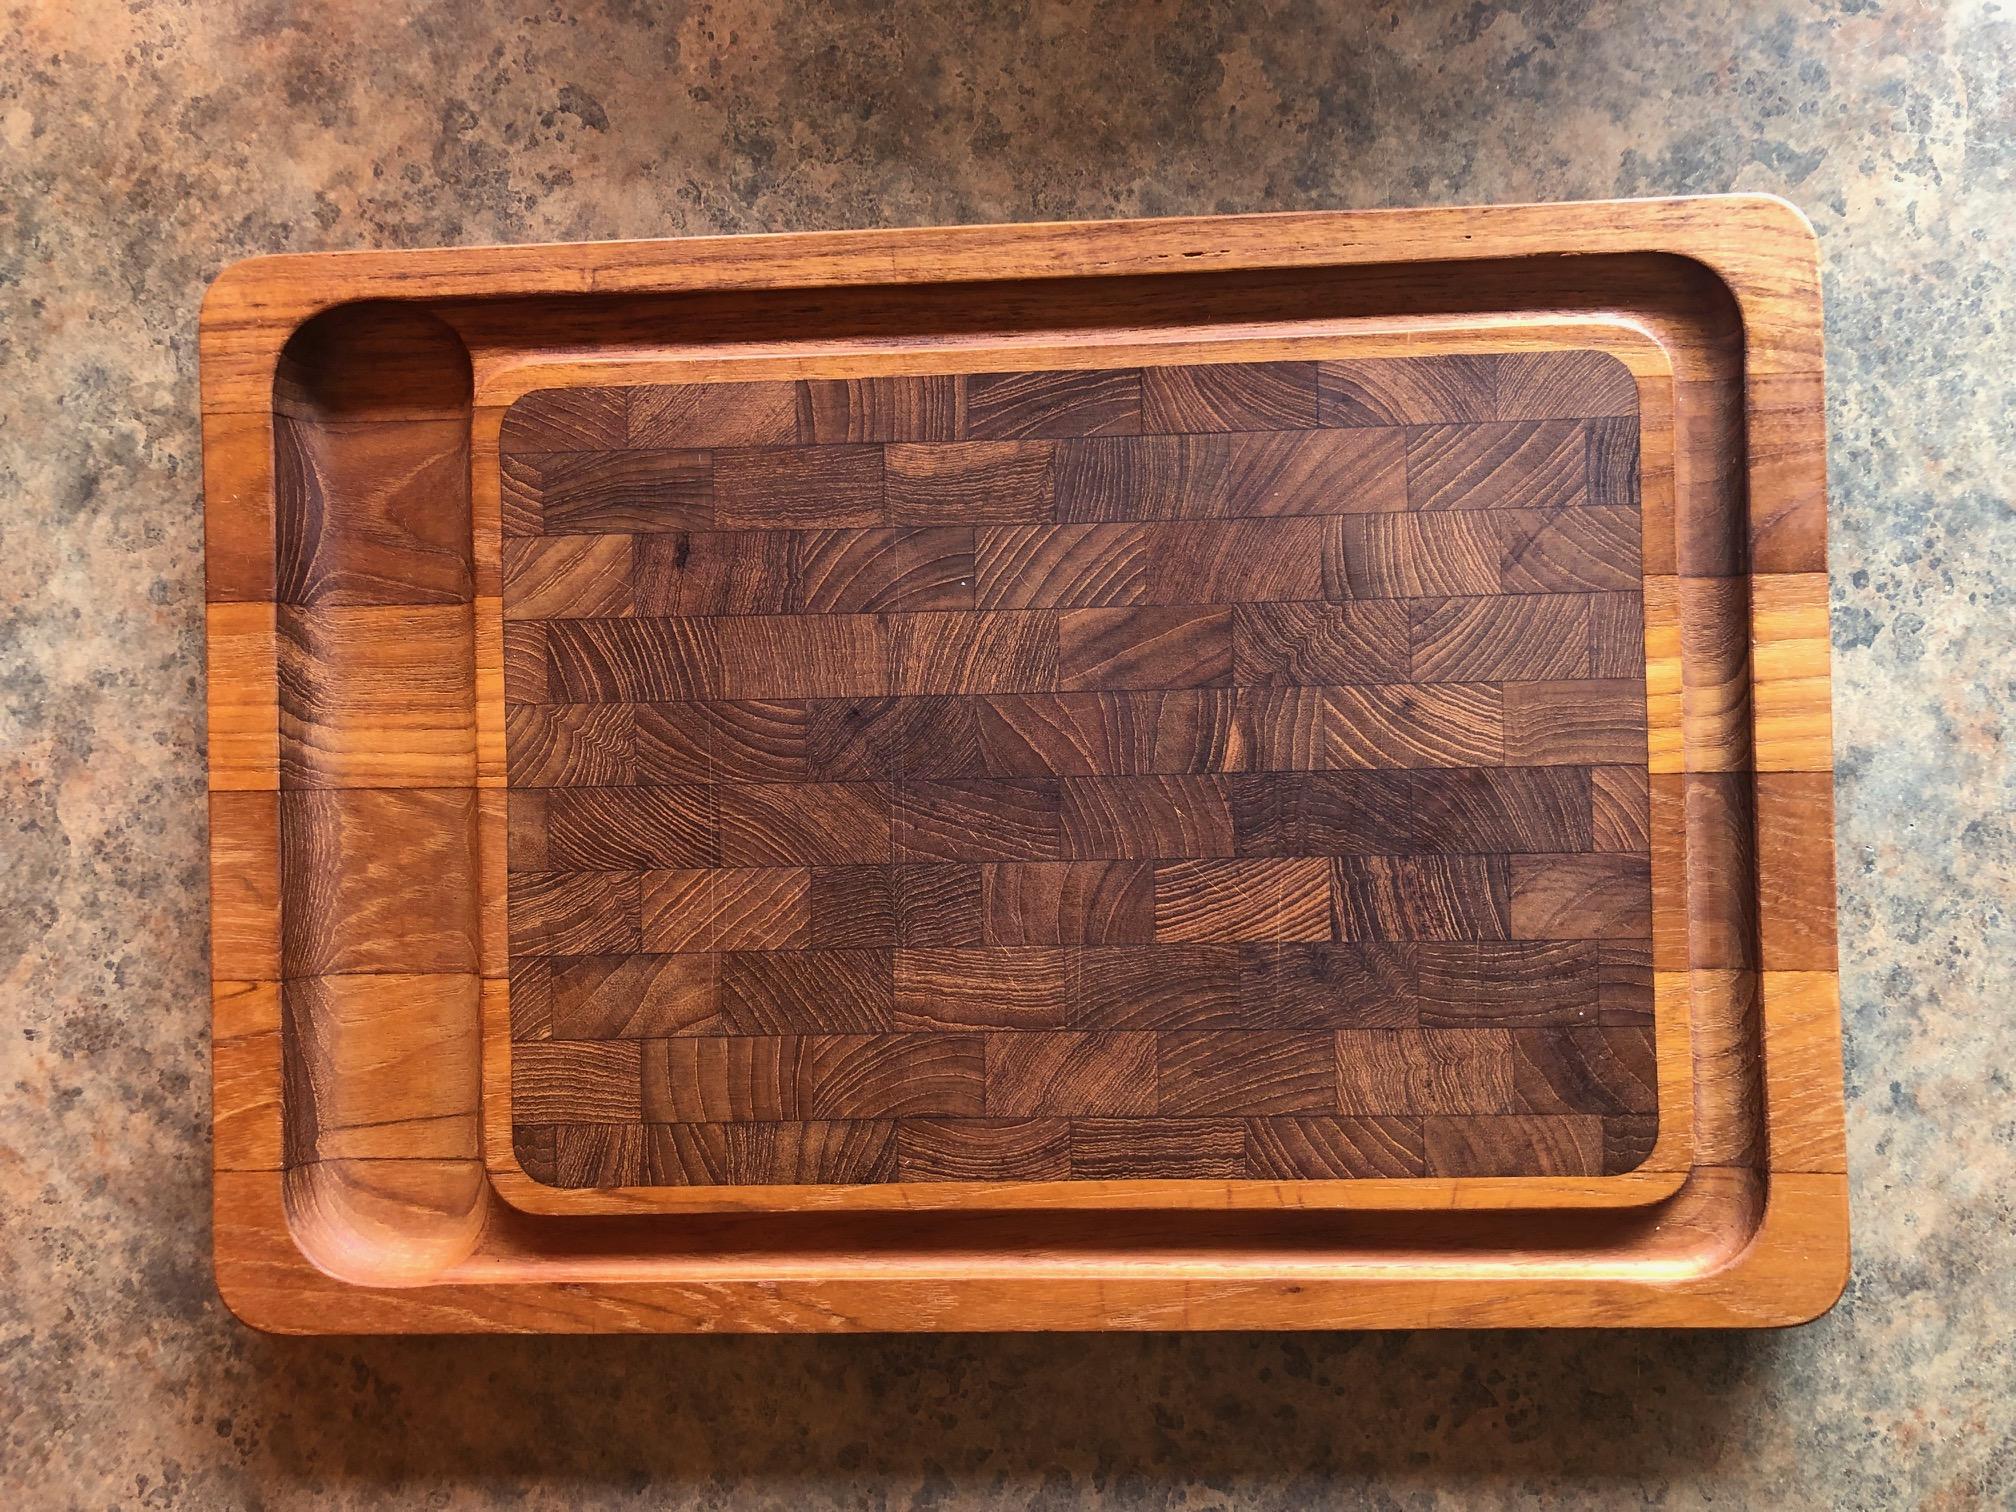 Pair of Danish modern teak butcher block cutting board / tray for cheese with edge by Jens Quistgaard for Dansk, circa 1970s. The rectangle cutting board measures 17.25